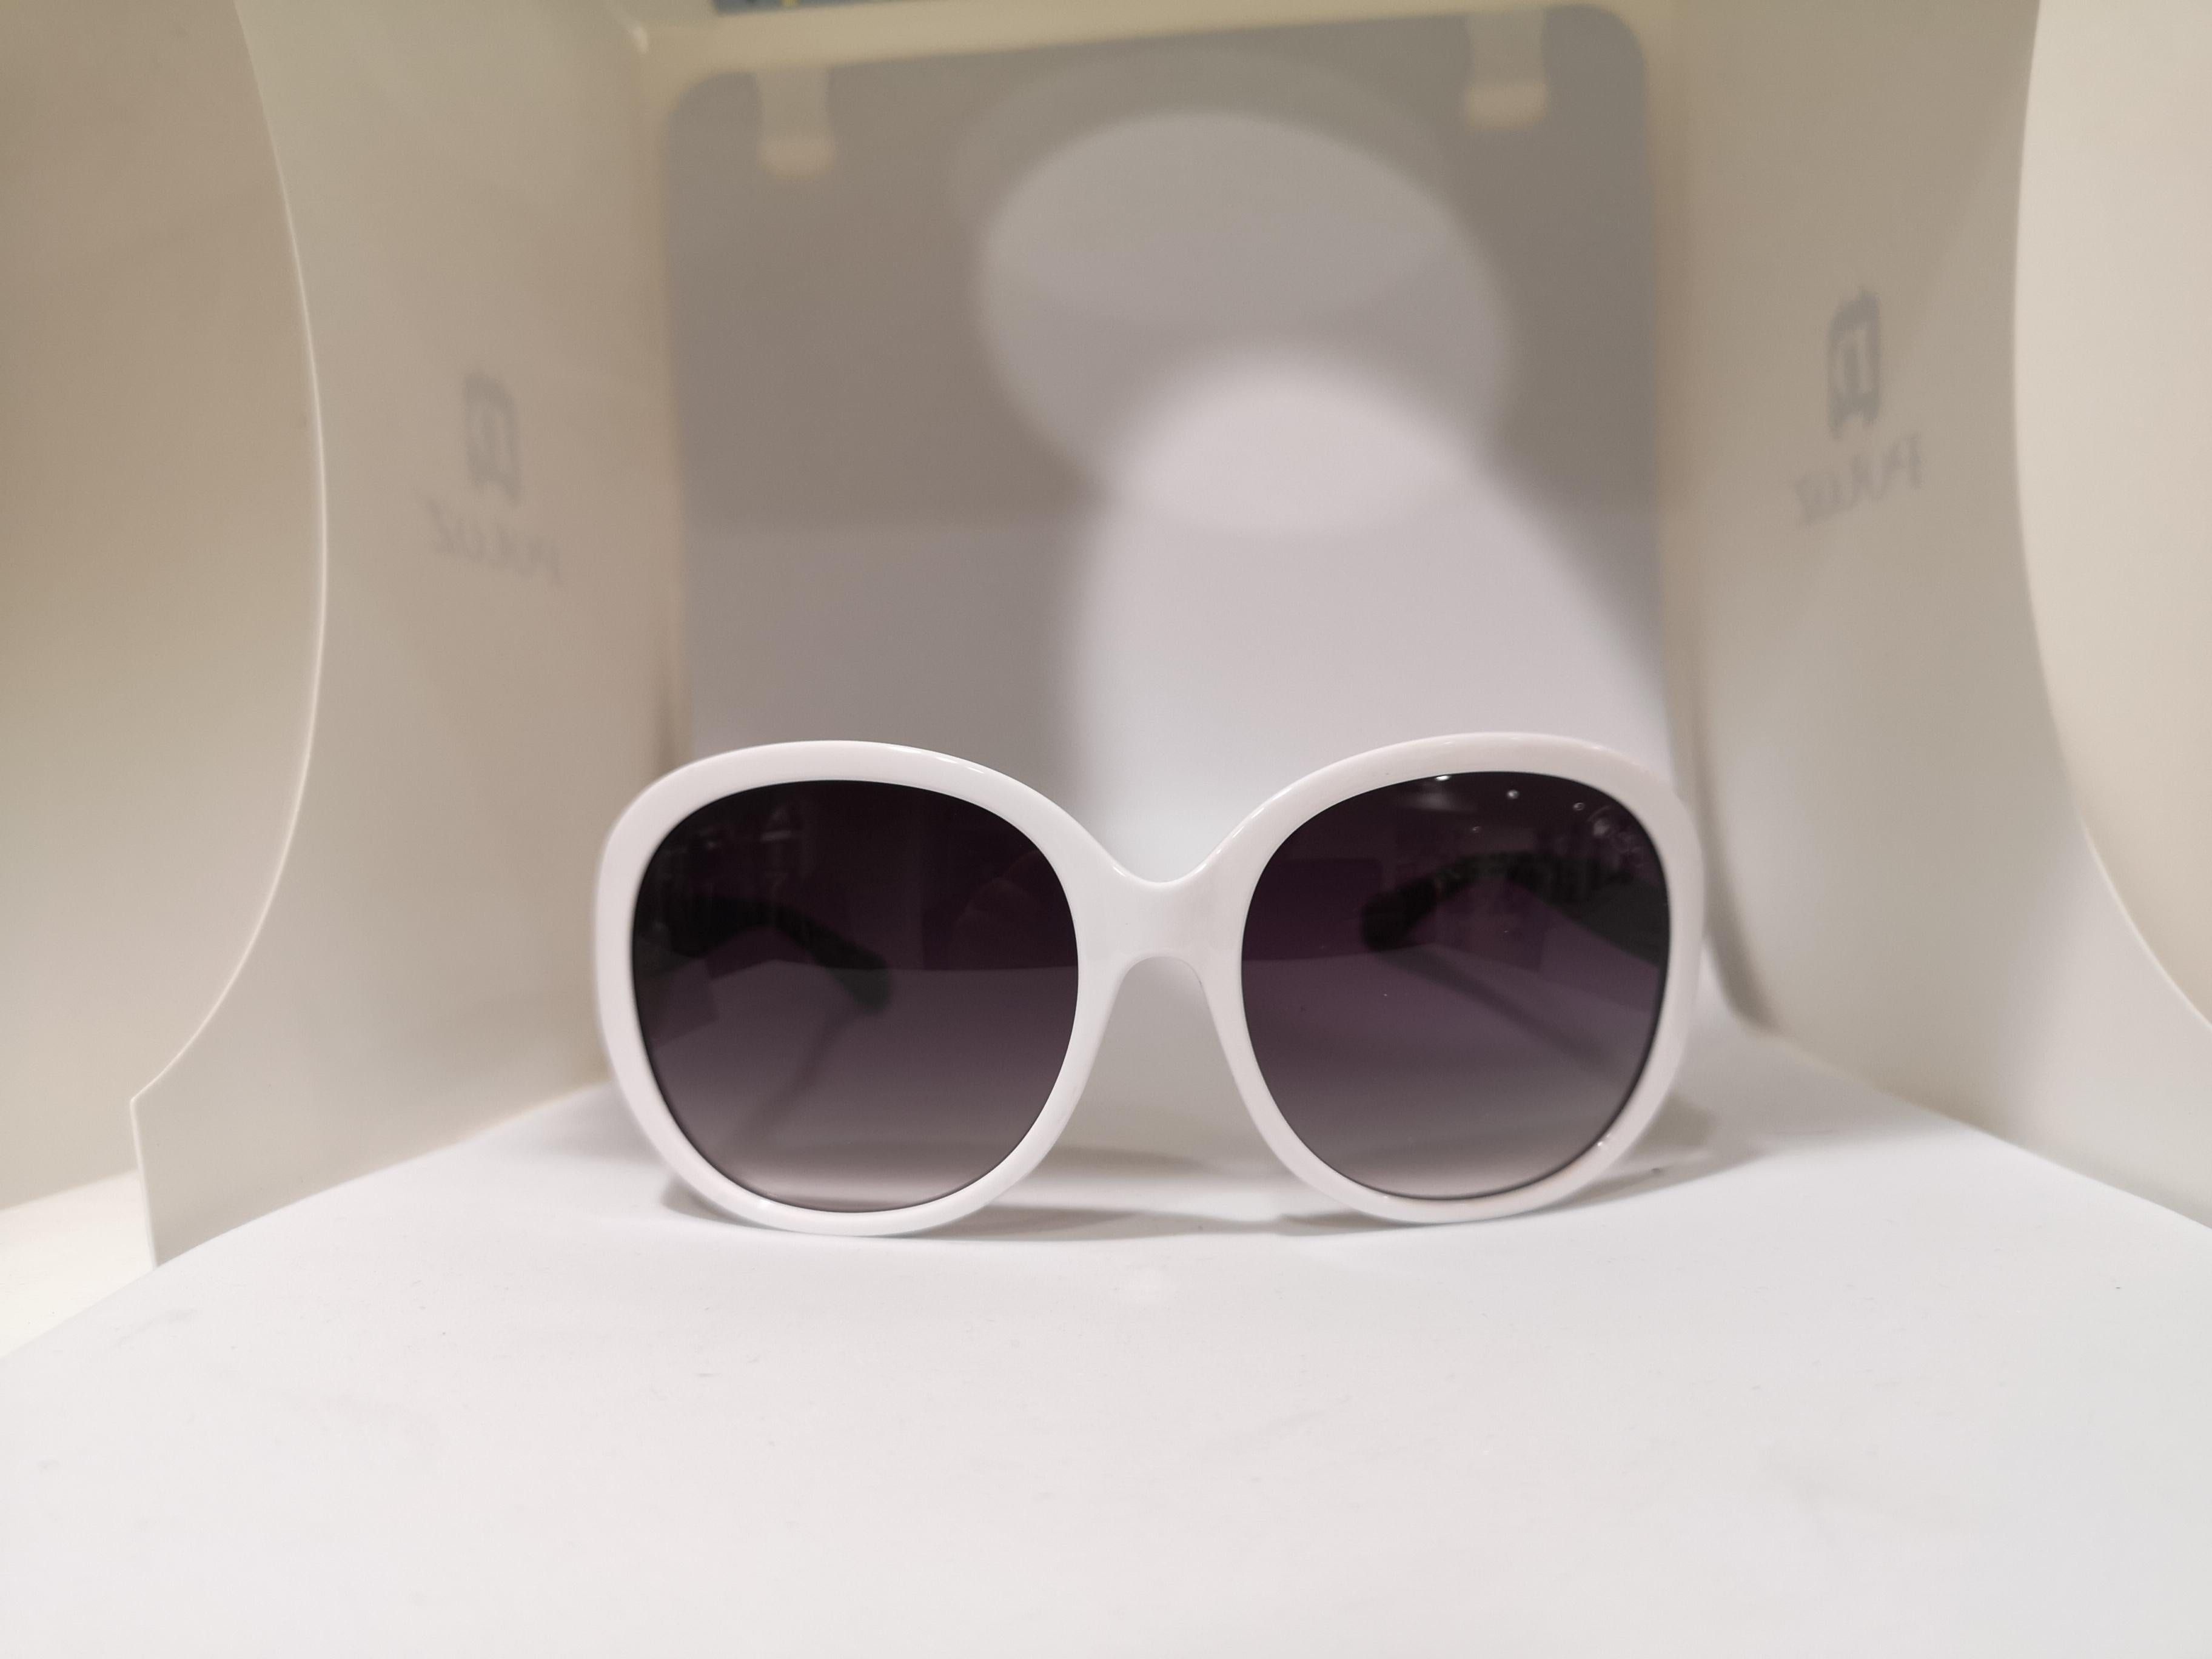 Luisstyle white sunglasses NWOT 
it's NWOT but comes without box